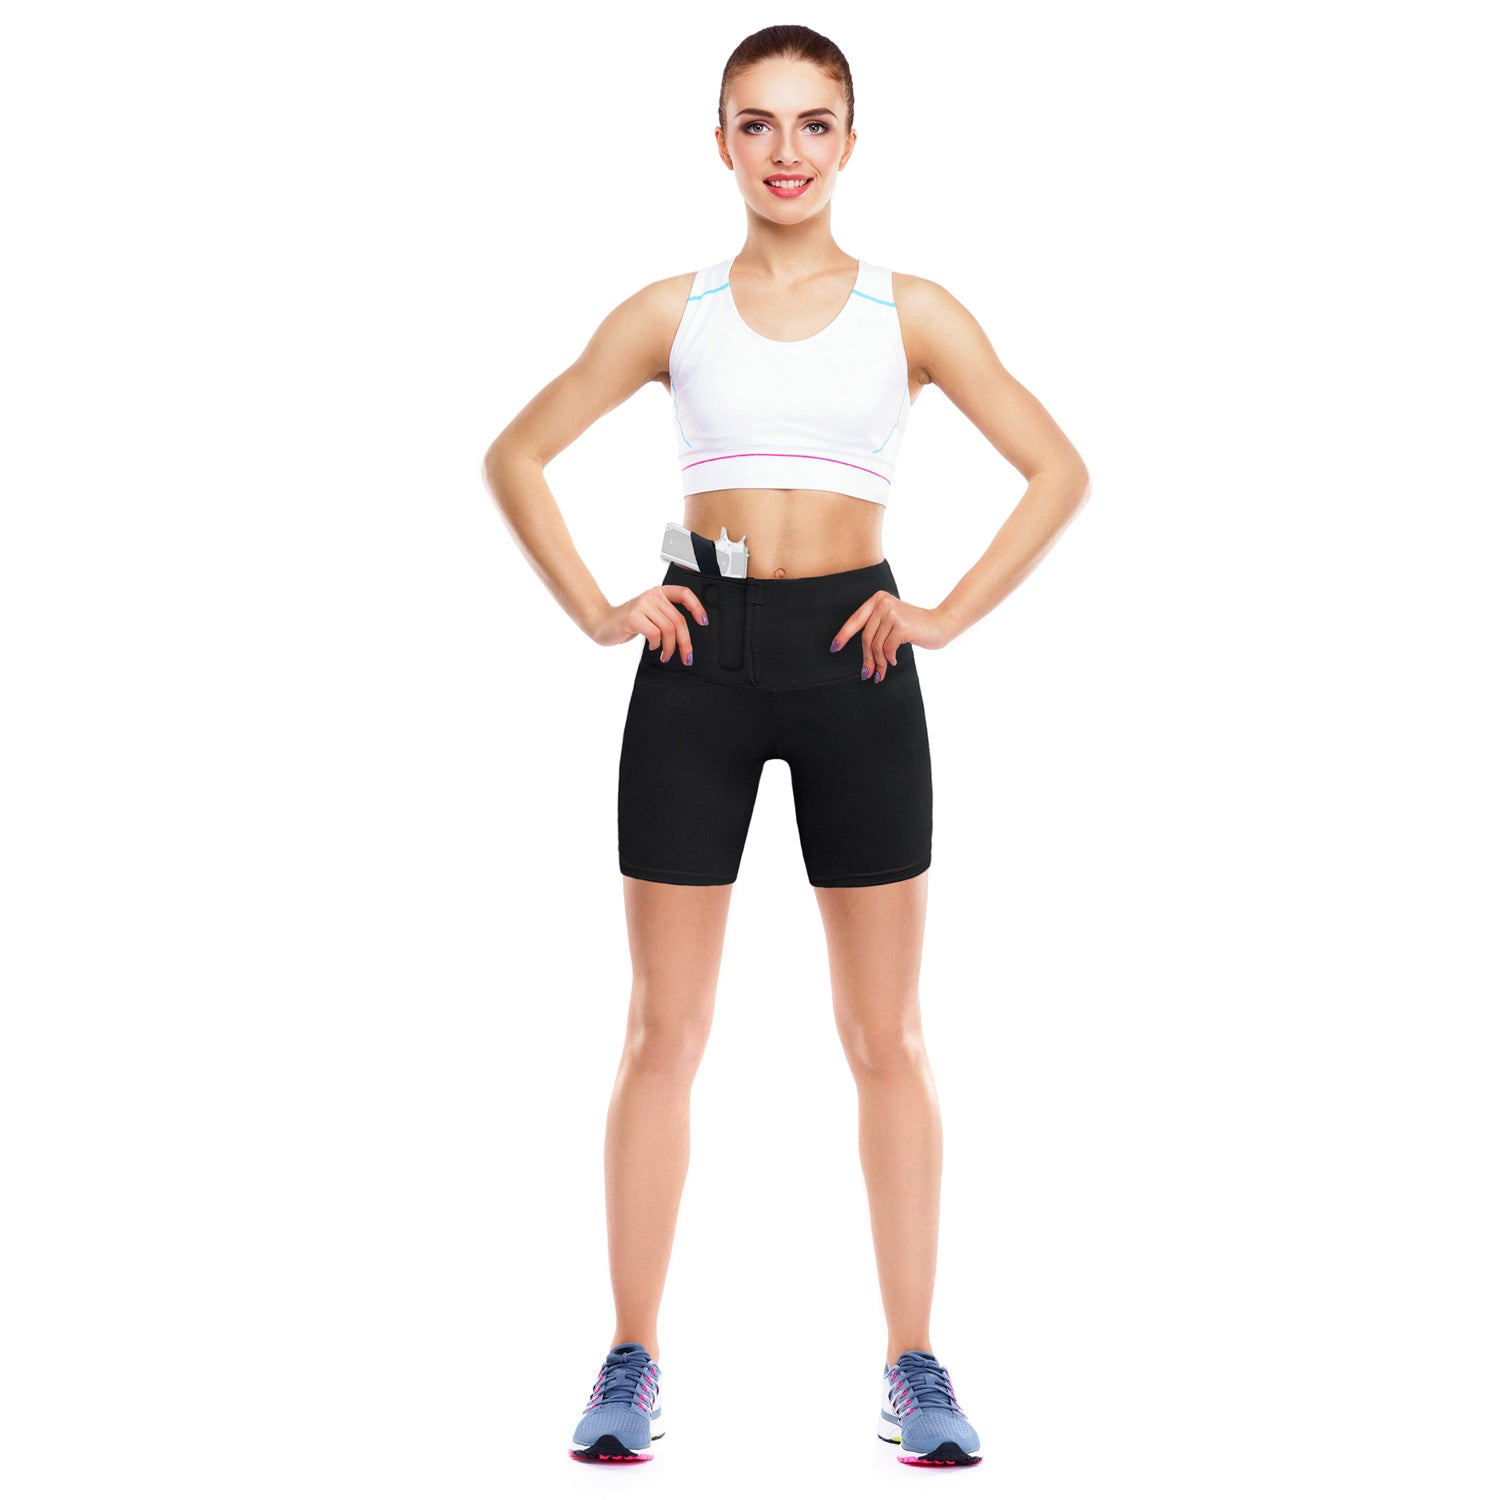 Women's Dual Holster Concealed Carry Shorts Leggings - Mid-thigh